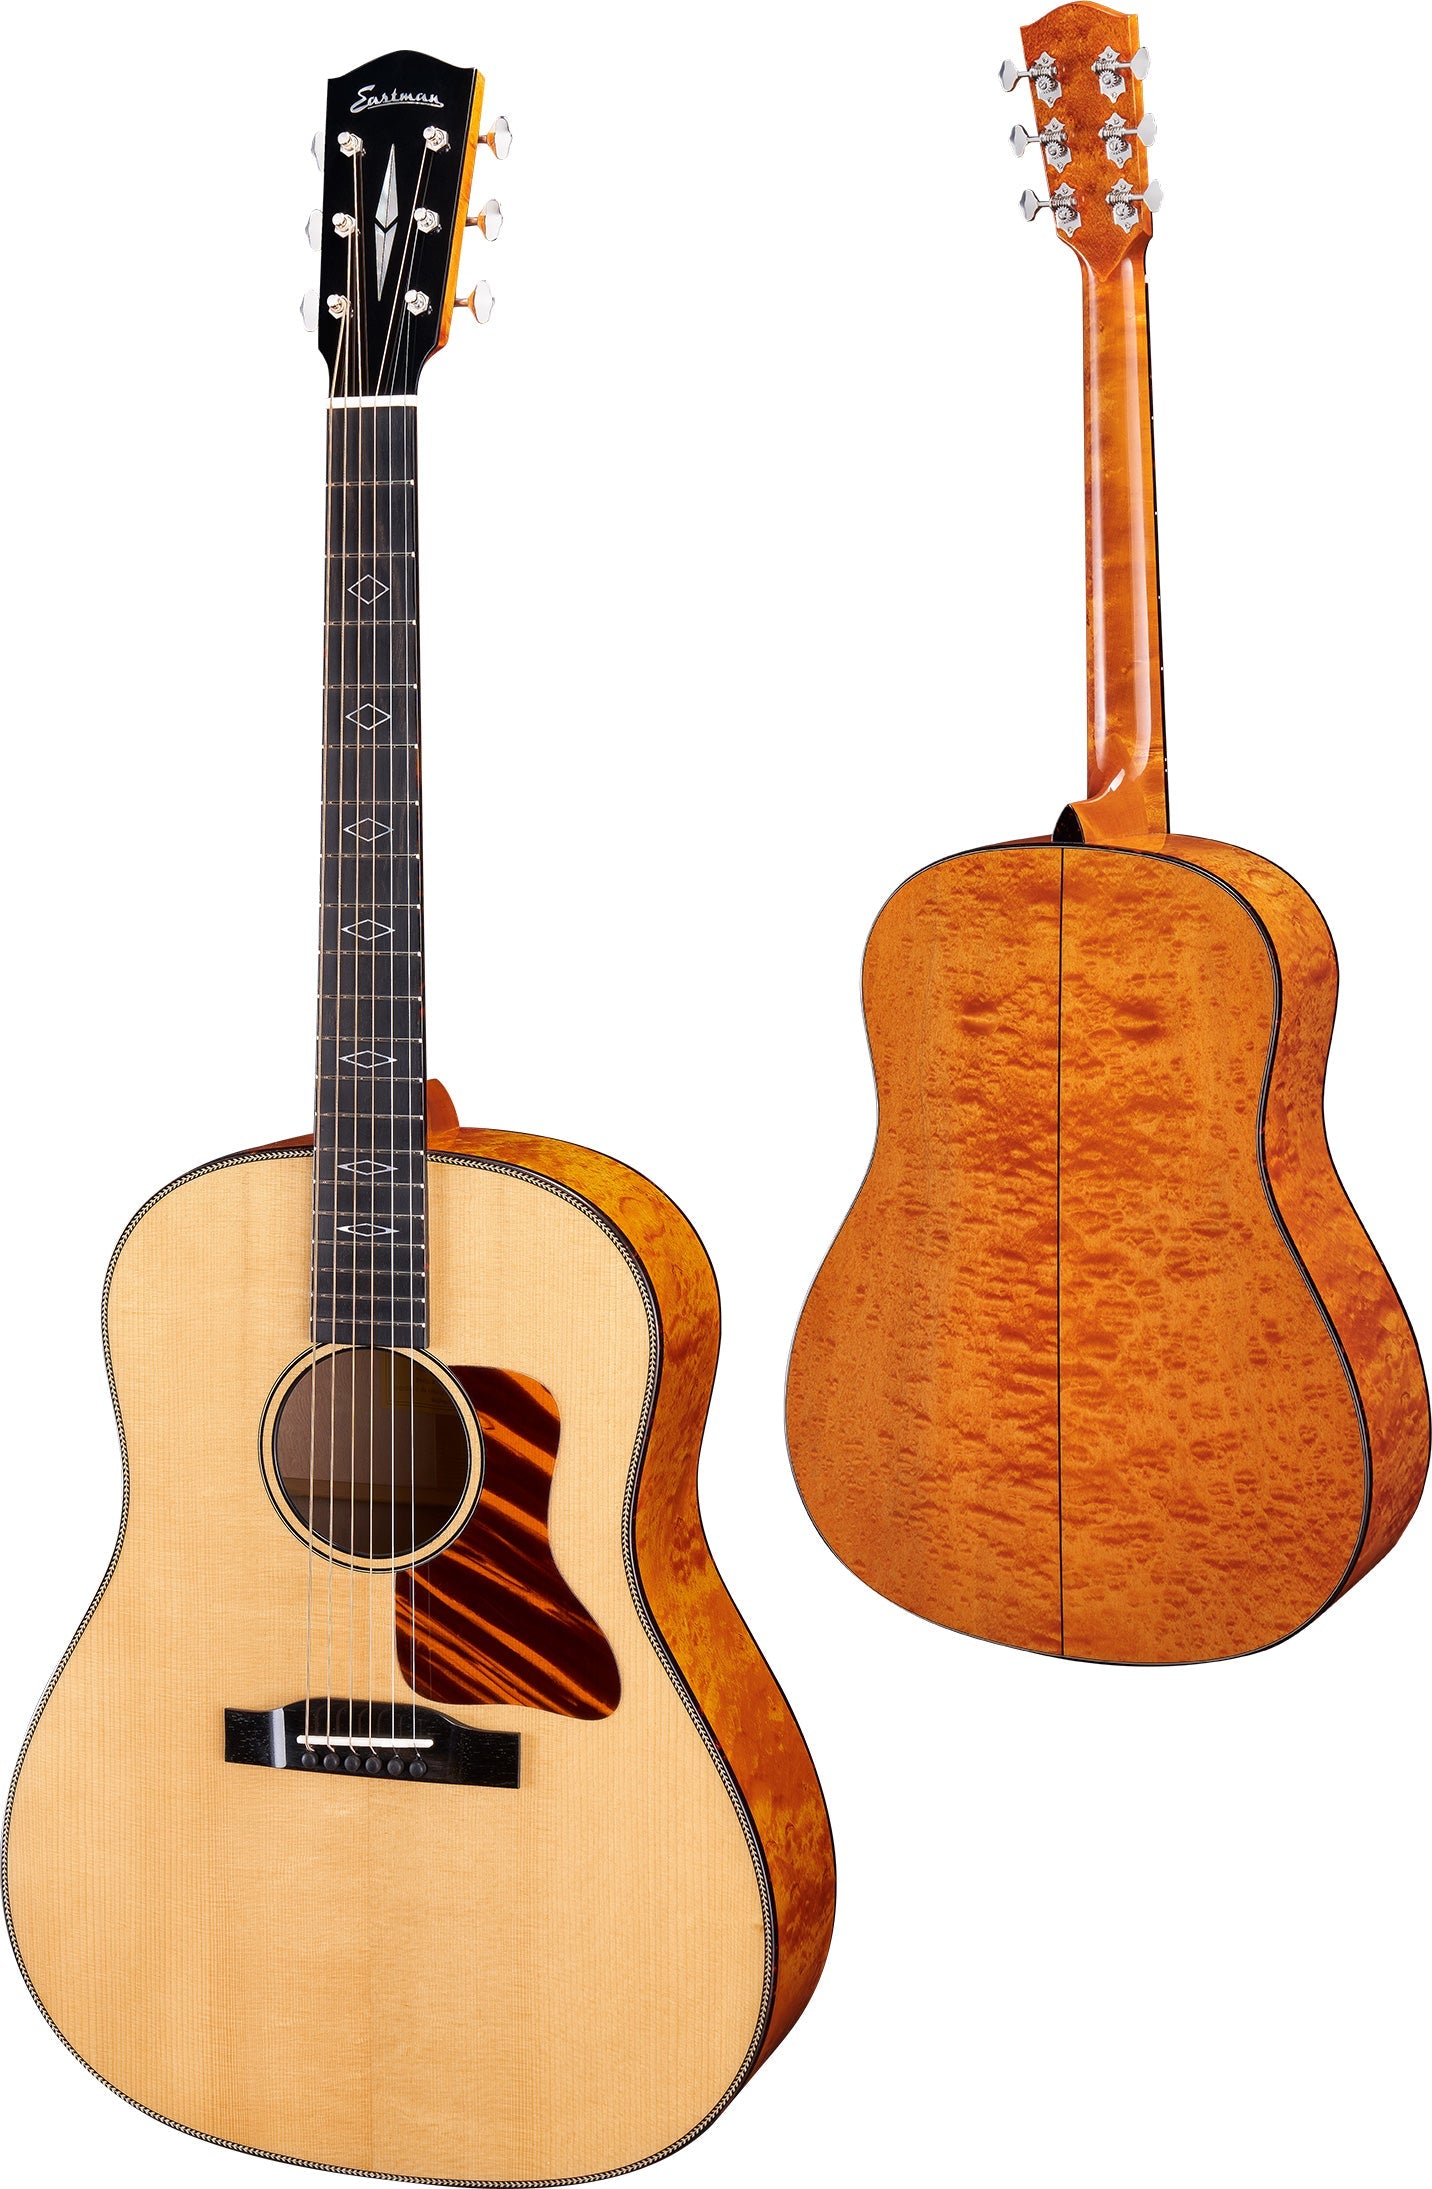 Eastman E16SS-TC-LTD - (INCREDIBLY LIMITED) (1 of 200 Worldwide), Acoustic Guitar for sale at Richards Guitars.